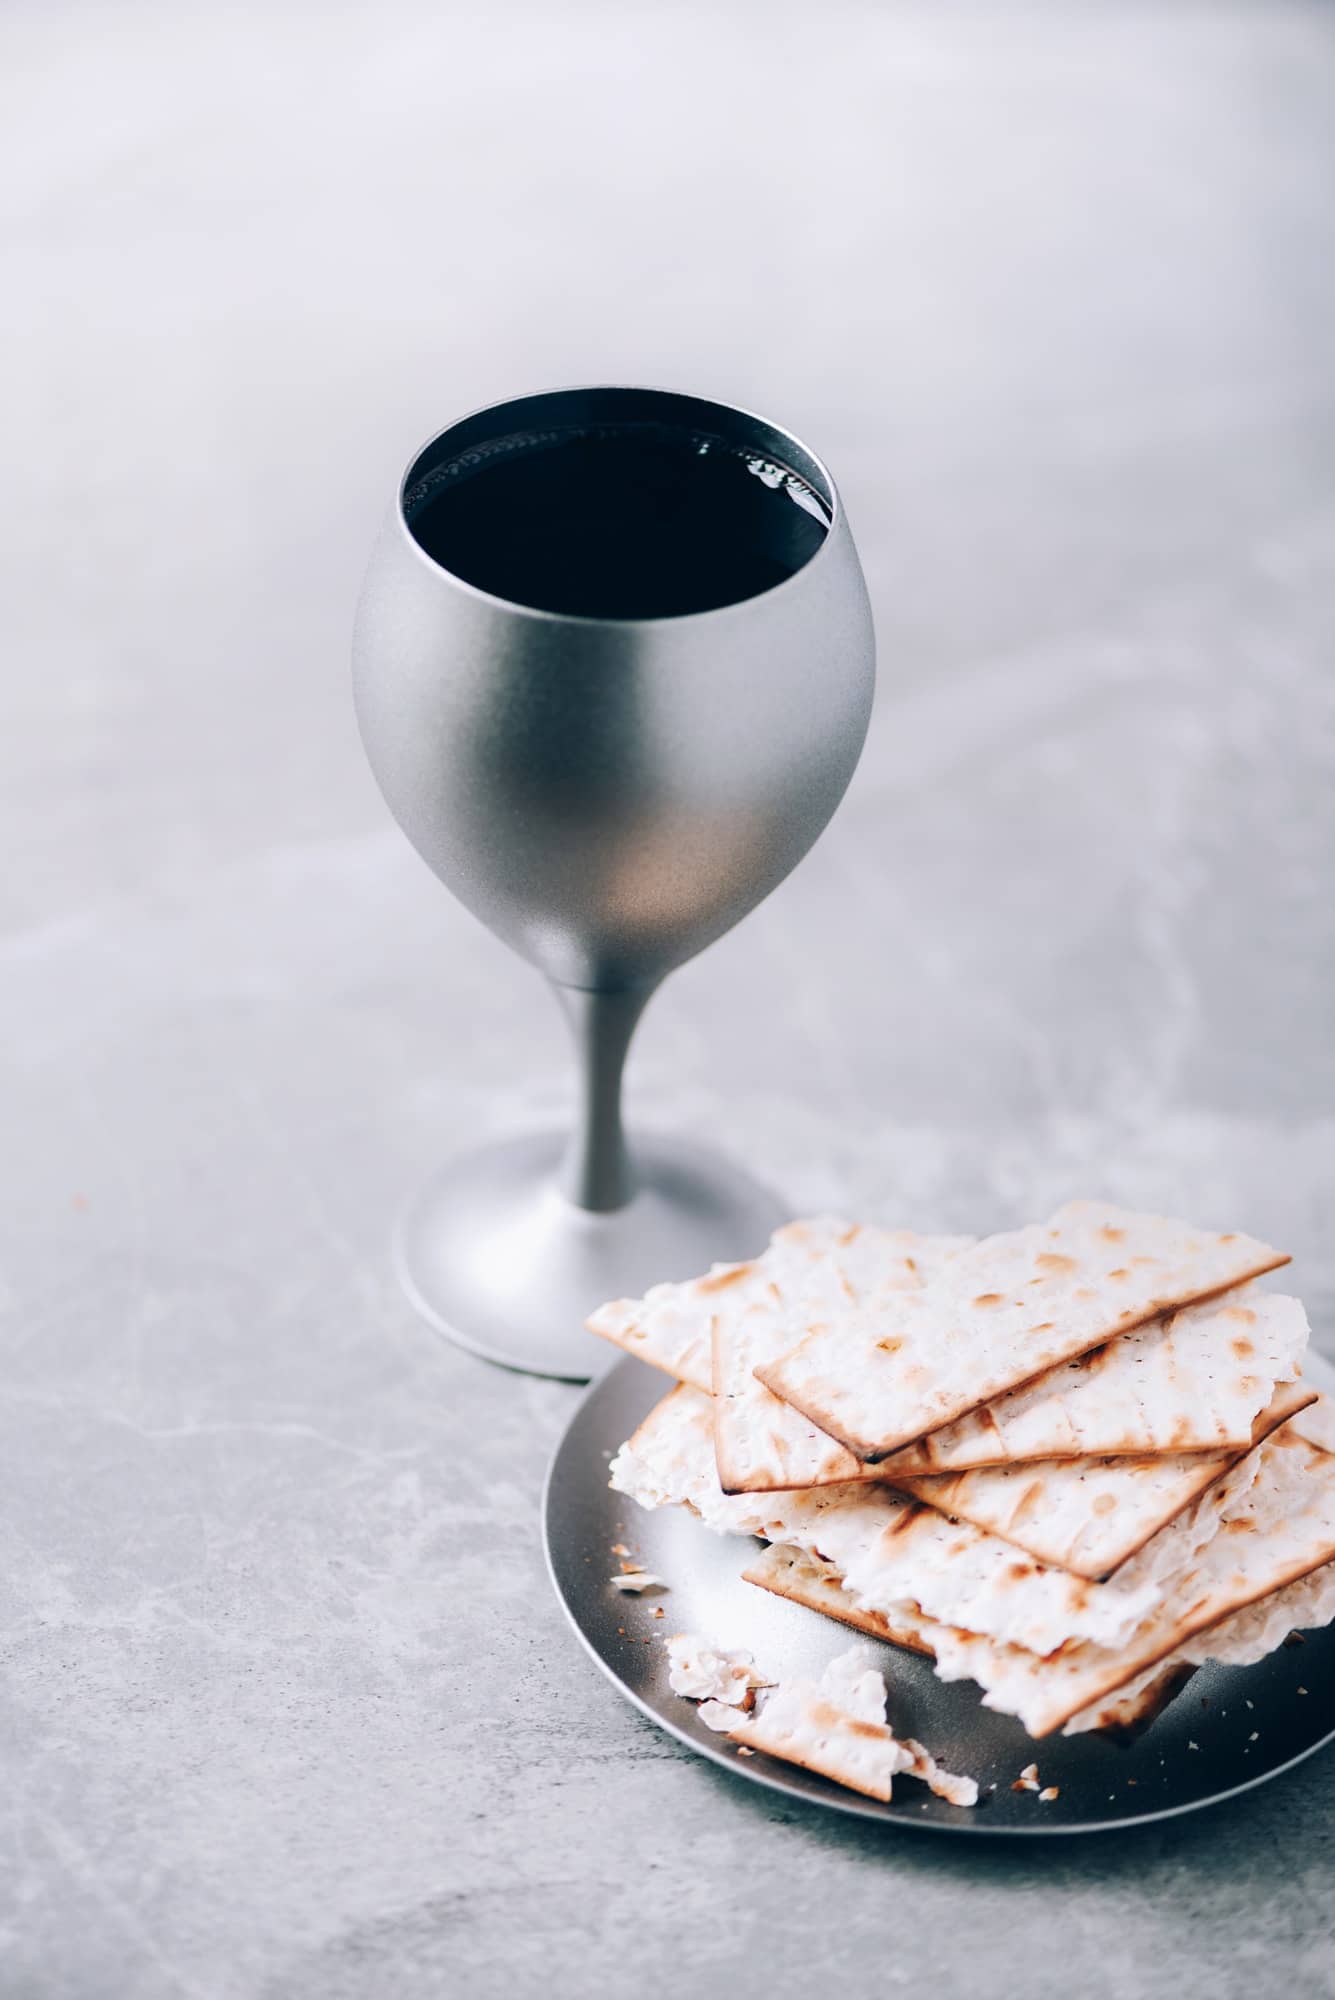 Jesish kiddush wine cup for passover with matzot, matzo bread. Pesah holiday. Banner with copy space